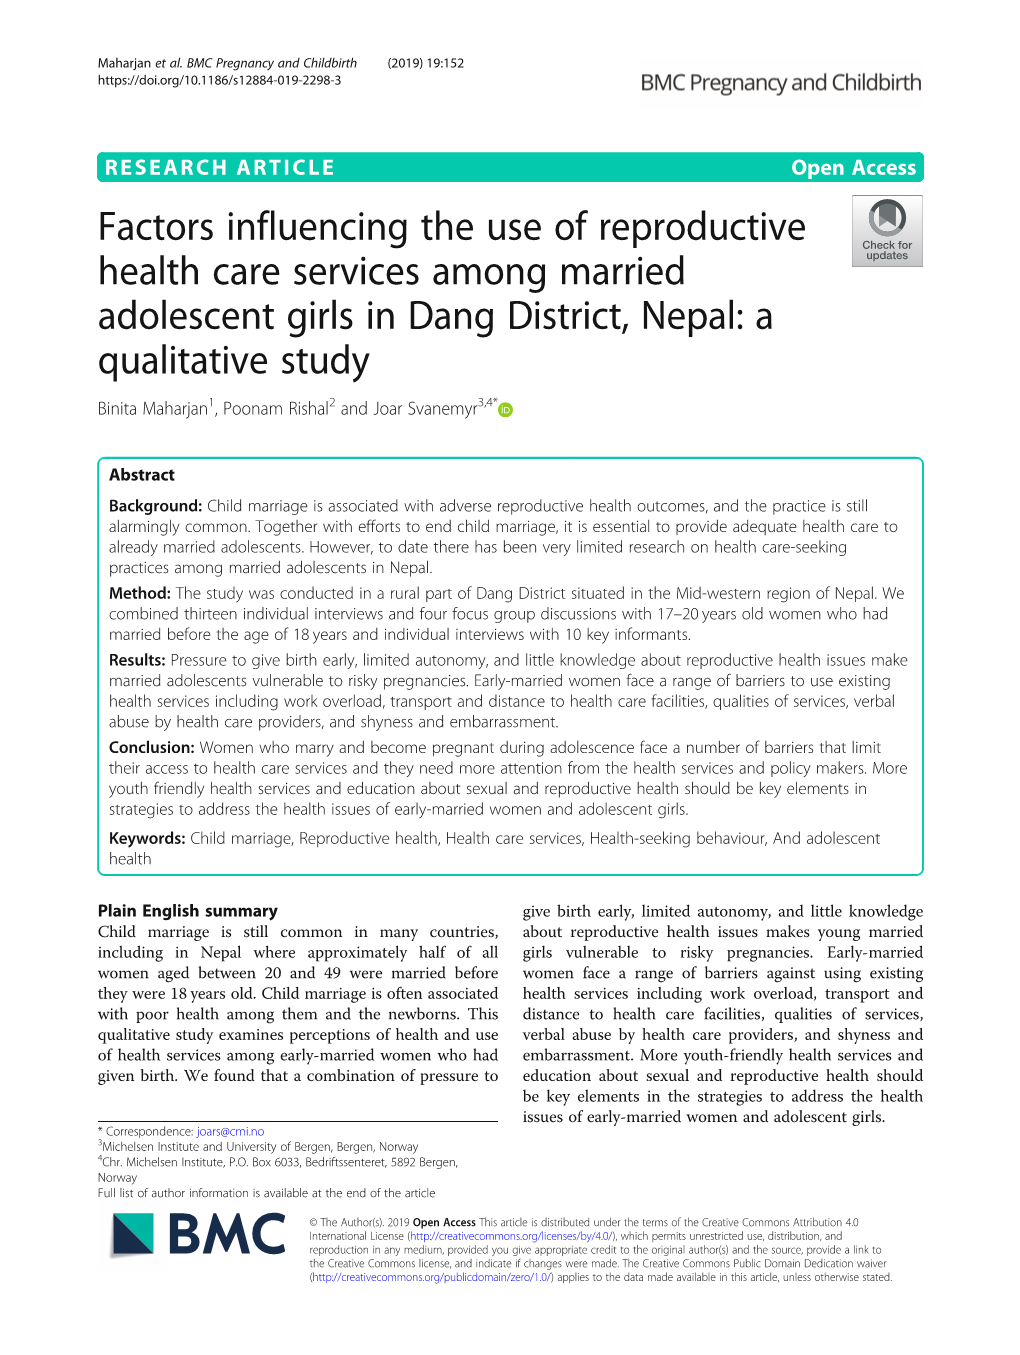 Factors Influencing the Use of Reproductive Health Care Services